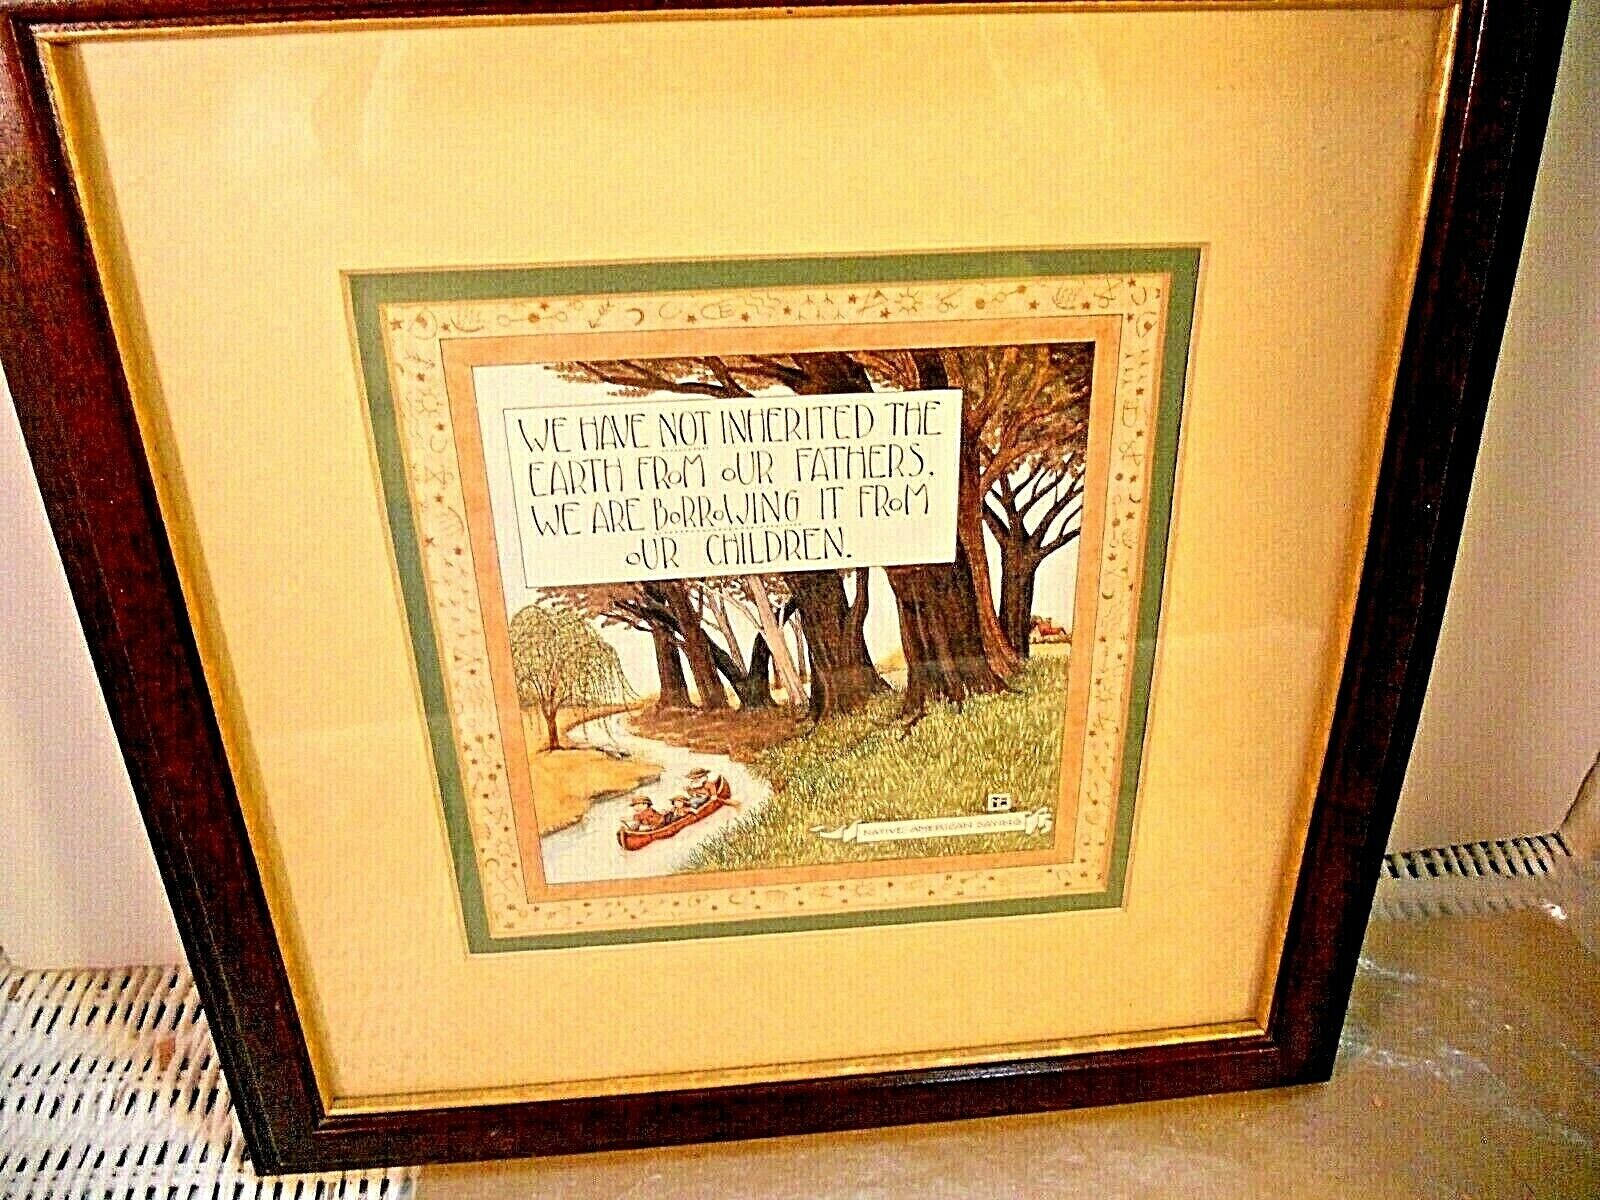 Mary Engelbreit matted, framed print “We Have Not Inherited...\